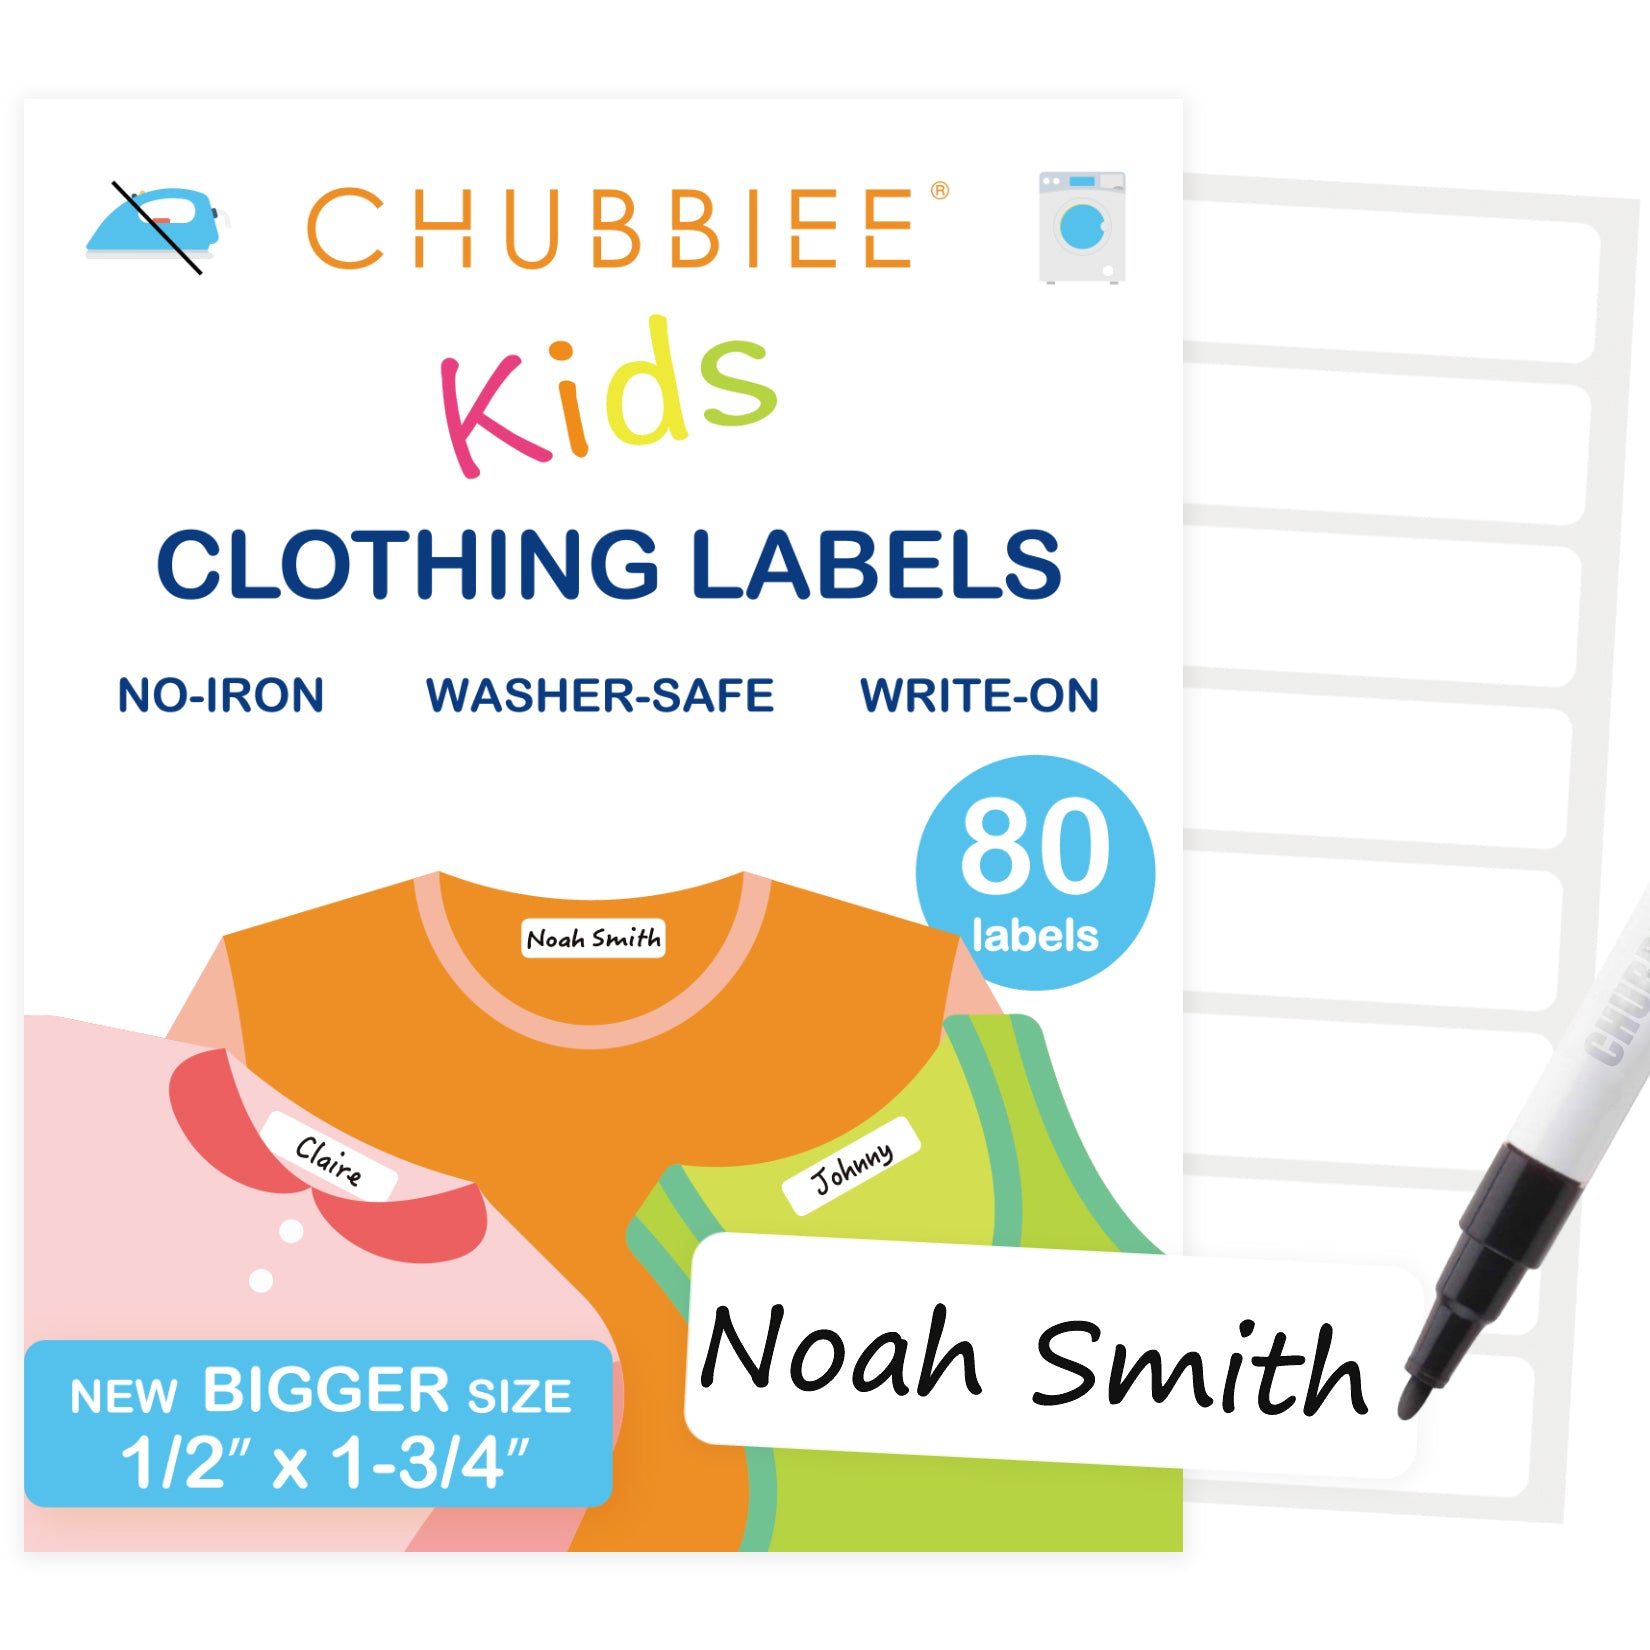 Clothing Labels For Kids: Name Stickers For Clothes  Name Bubbles I18n  Error: Missing interpolation value page for Page {{ page }}